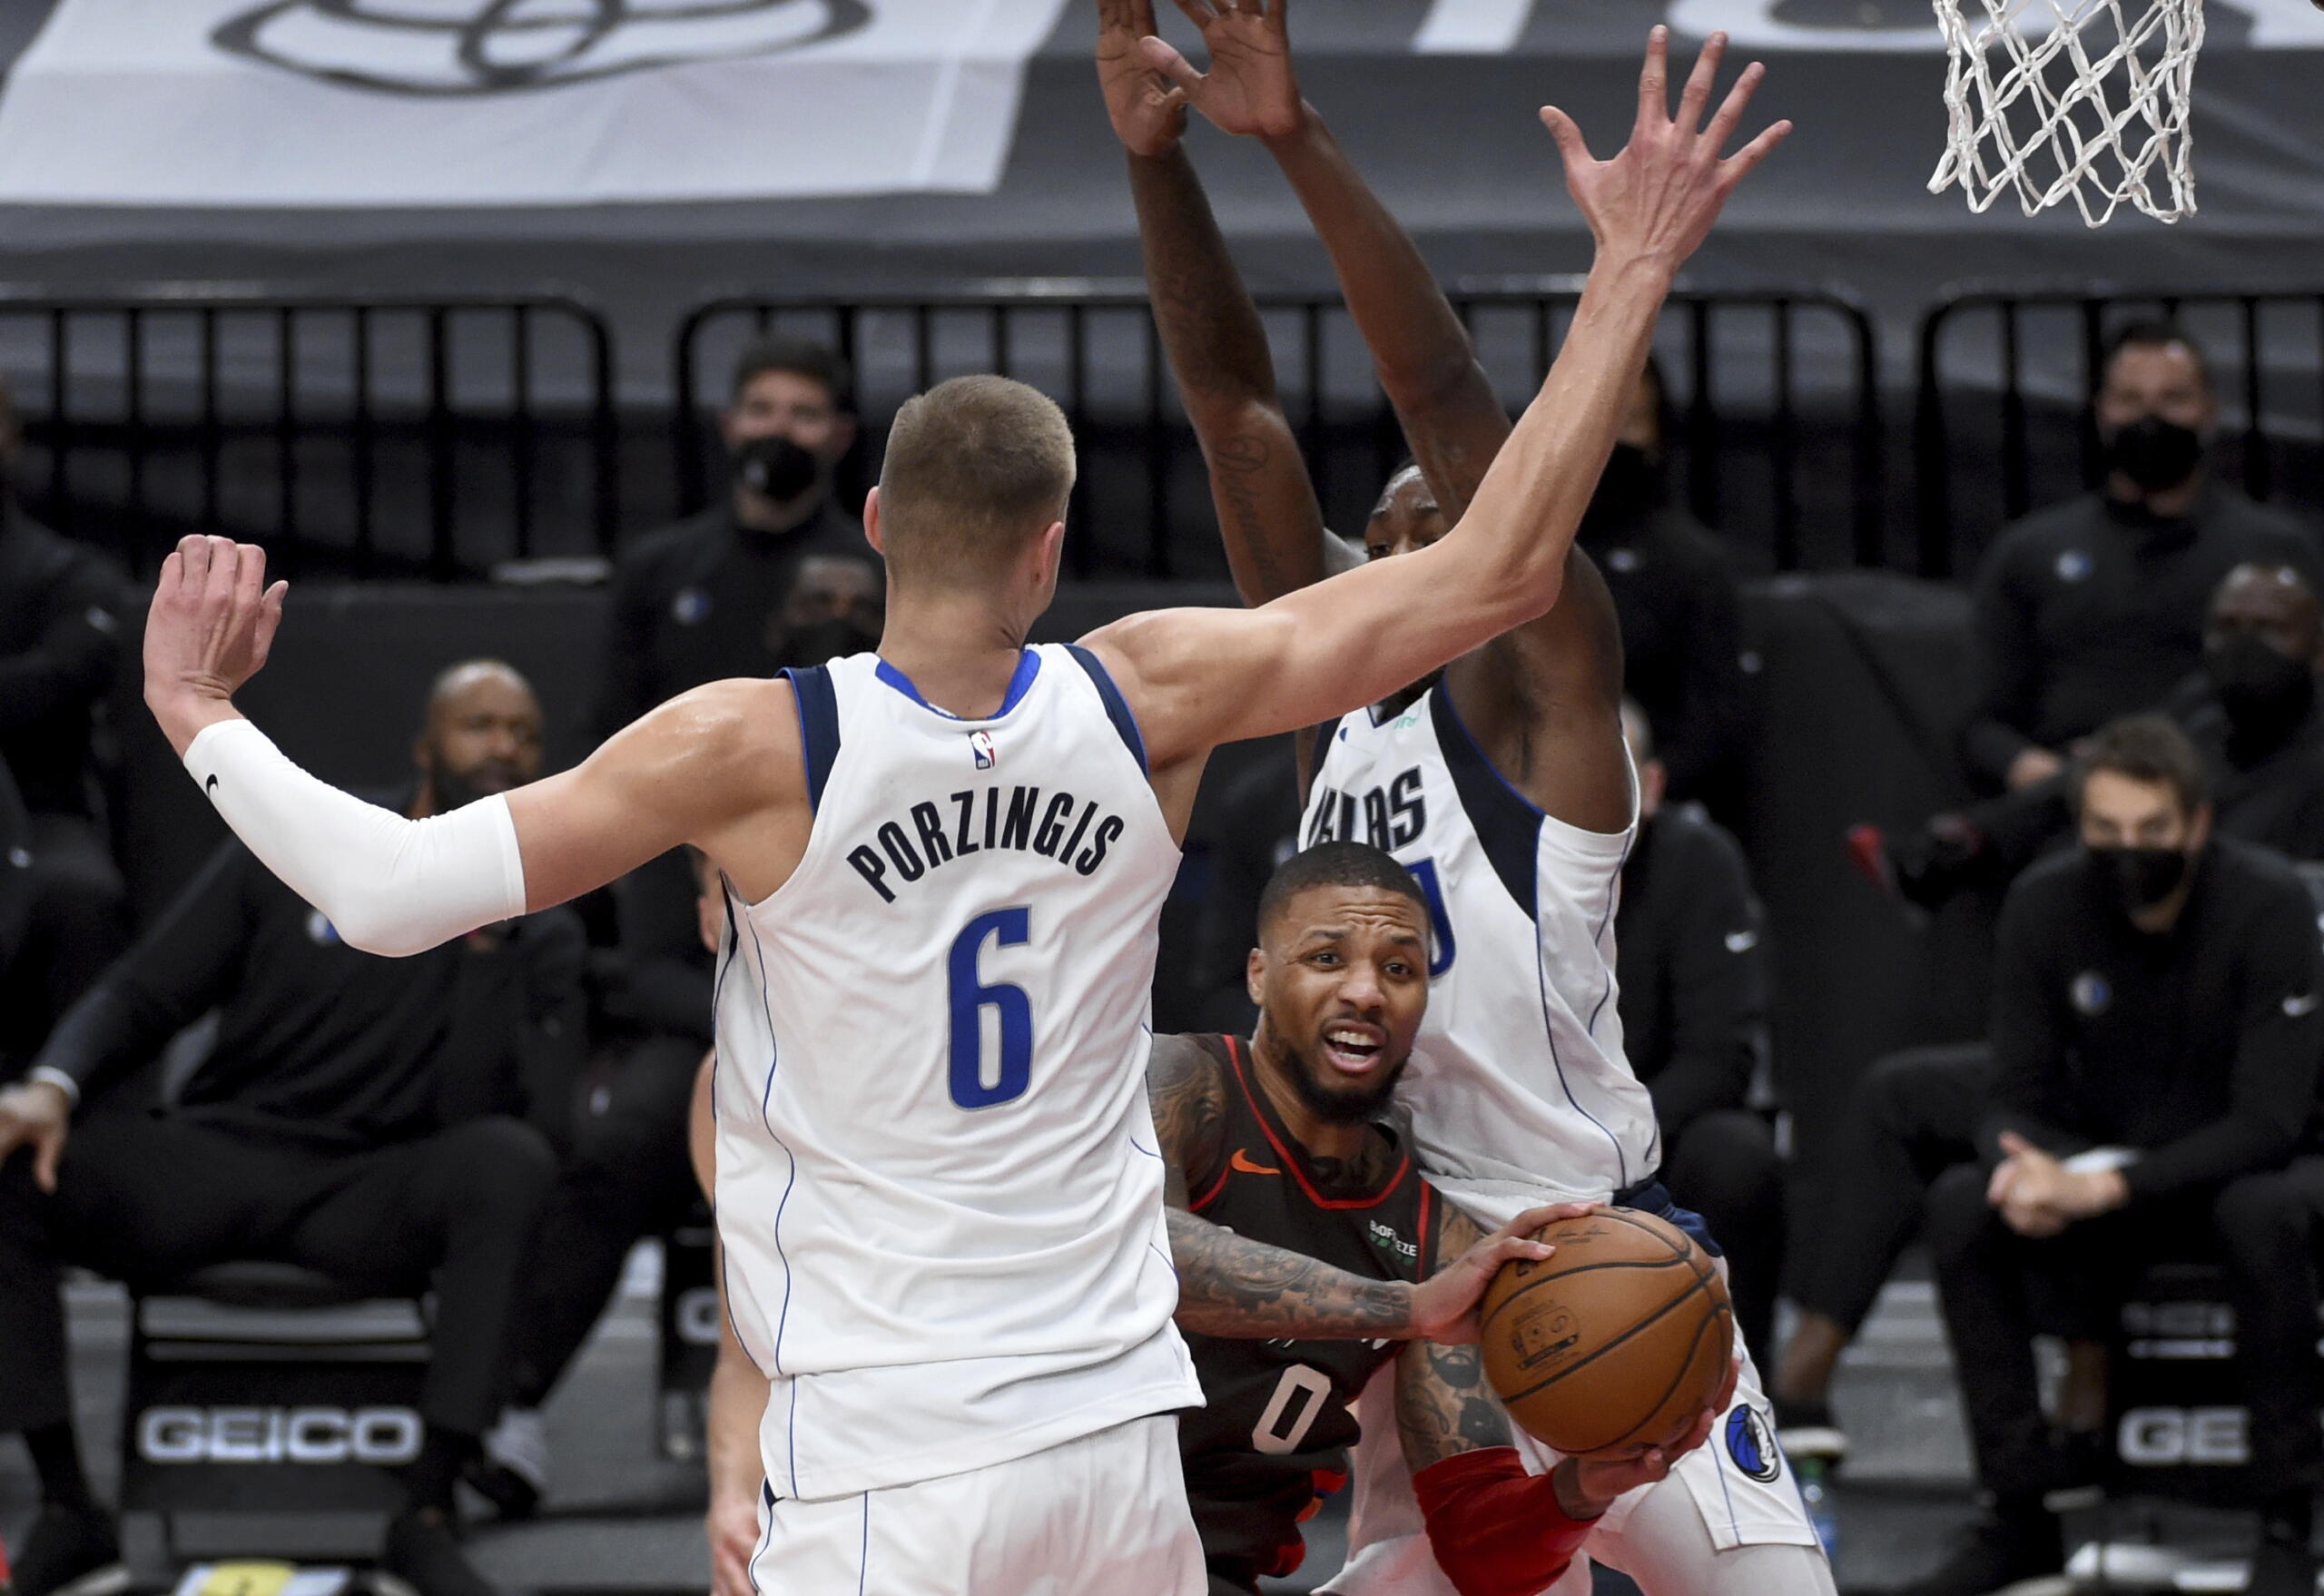 Portland Trail Blazers guard Damian Lillard, middle, passes the ball on Dallas Mavericks center Kristaps Porzingis, left, during the second half of an NBA basketball game in Portland, Ore., Sunday, March 21, 2021.